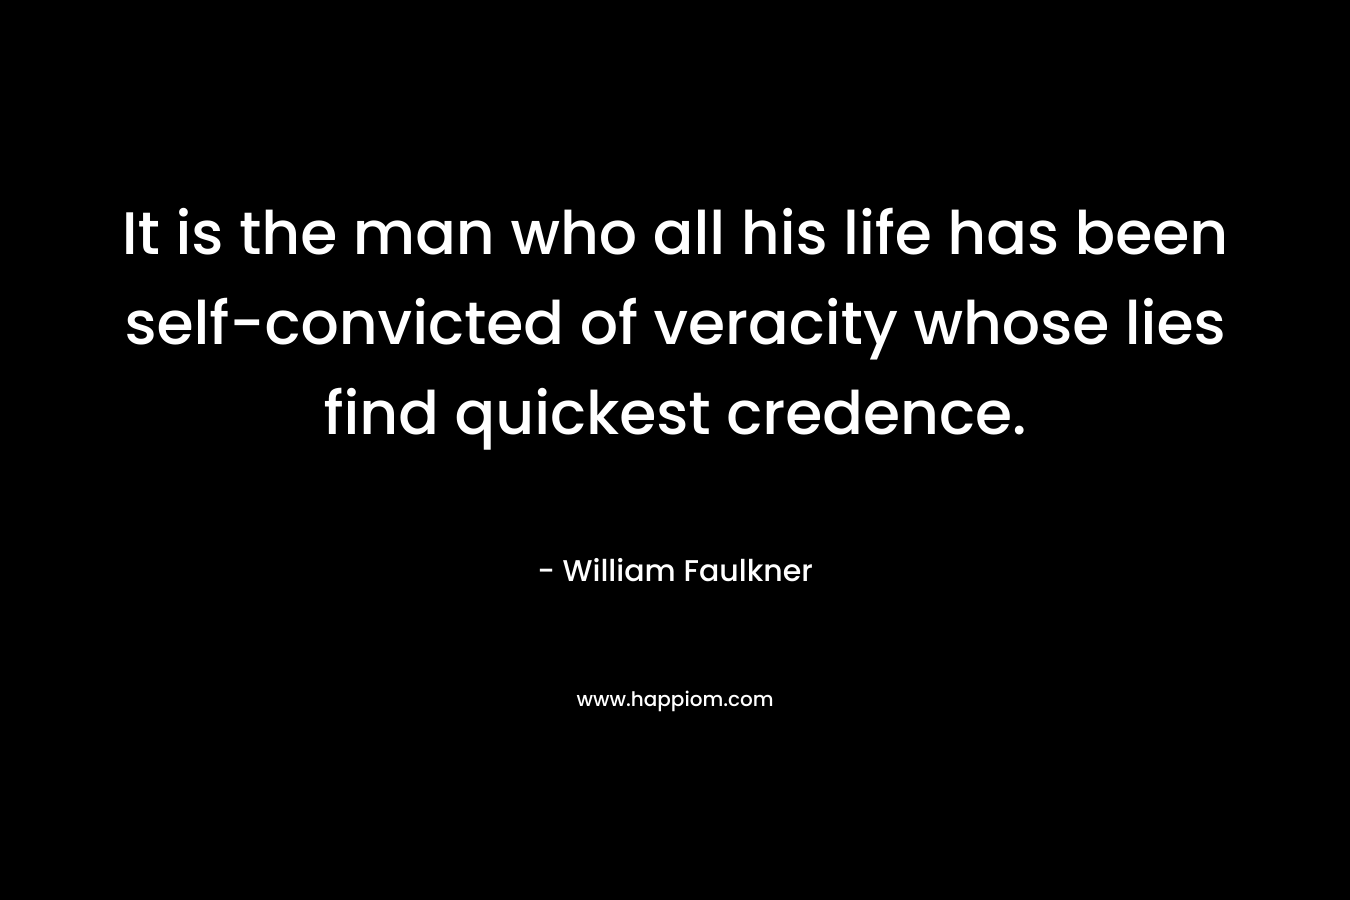 It is the man who all his life has been self-convicted of veracity whose lies find quickest credence. – William Faulkner